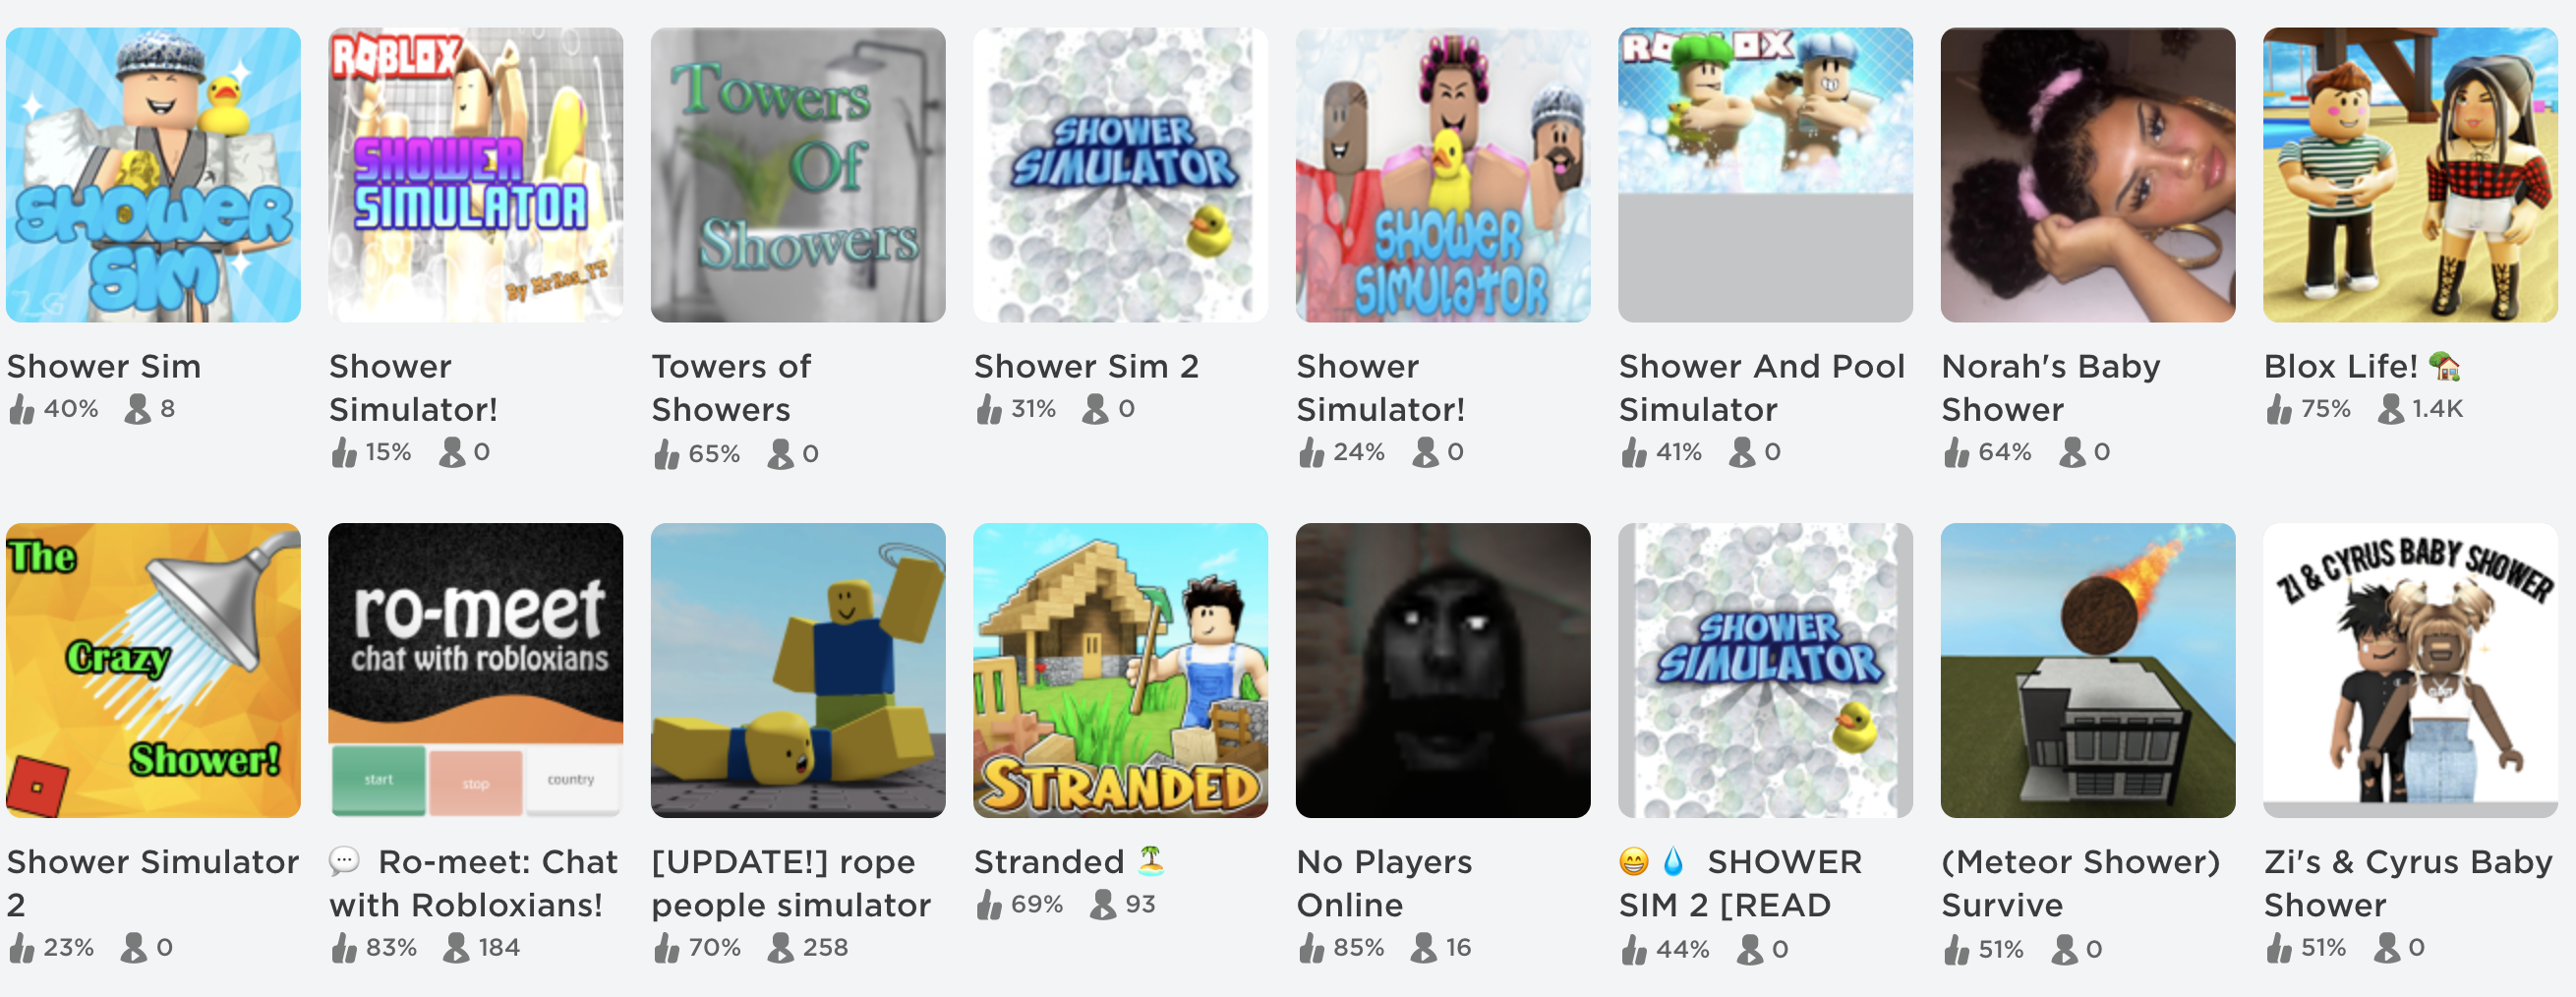 Roblox To Develop Improved Parental Controls As It Struggles With Sexually Explicit Content - sex games roblox not banned 2021